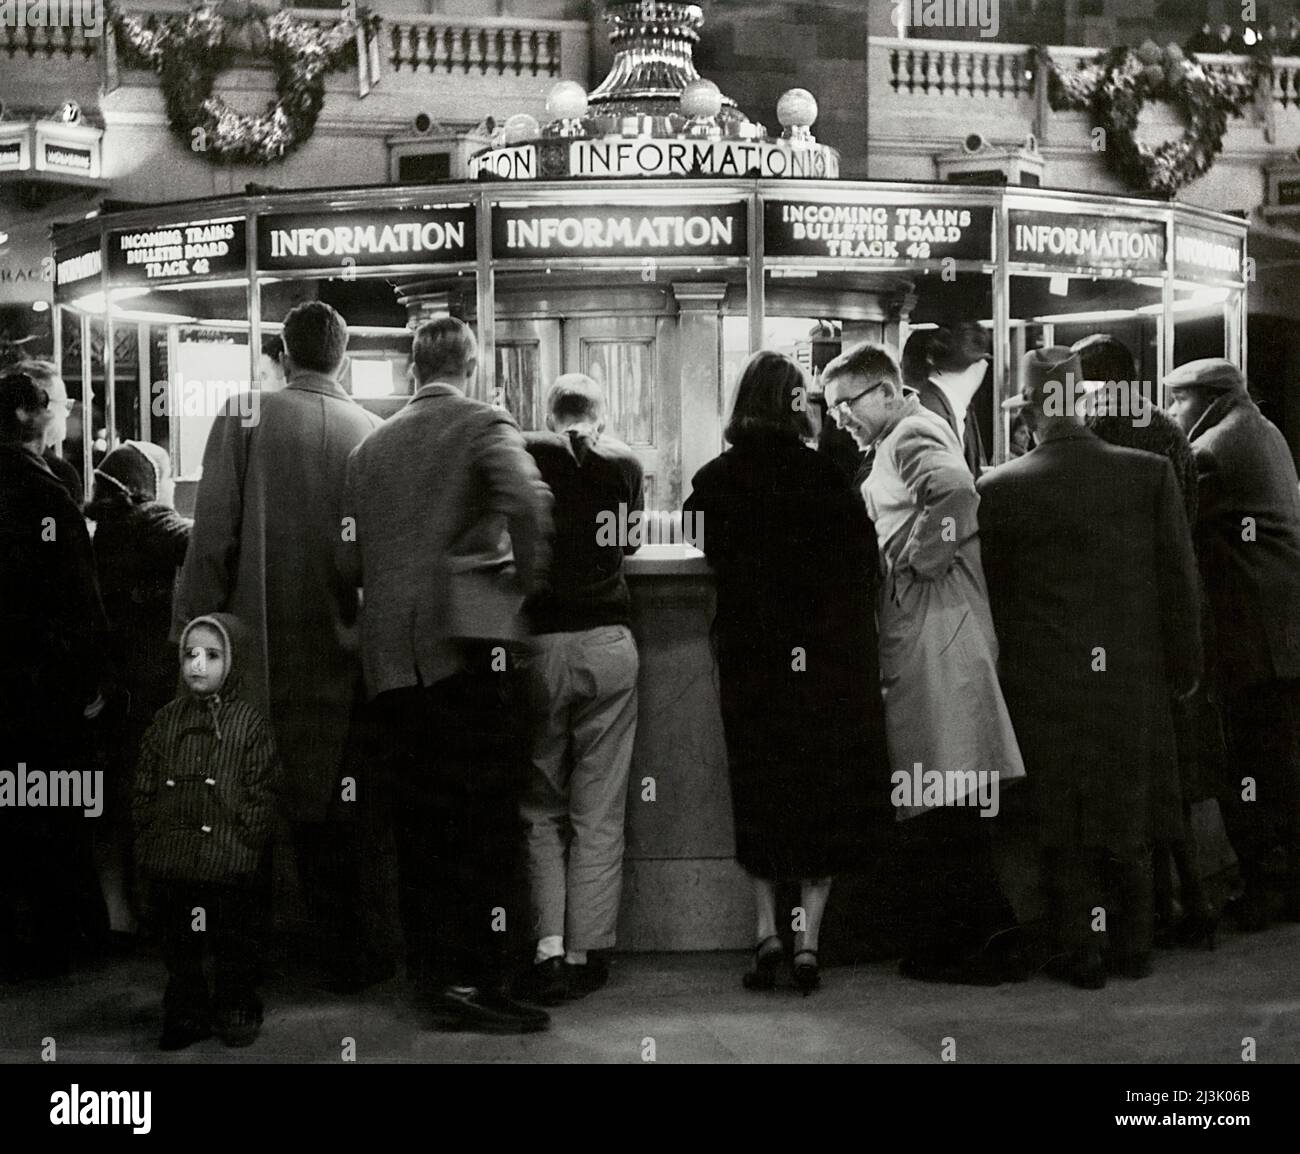 Group of People gathered around Information Booth, Grand Central Terminal, New York City, New York, USA, Angelo Rizzuto, Anthony Angel Collection, December 1957 Stock Photo